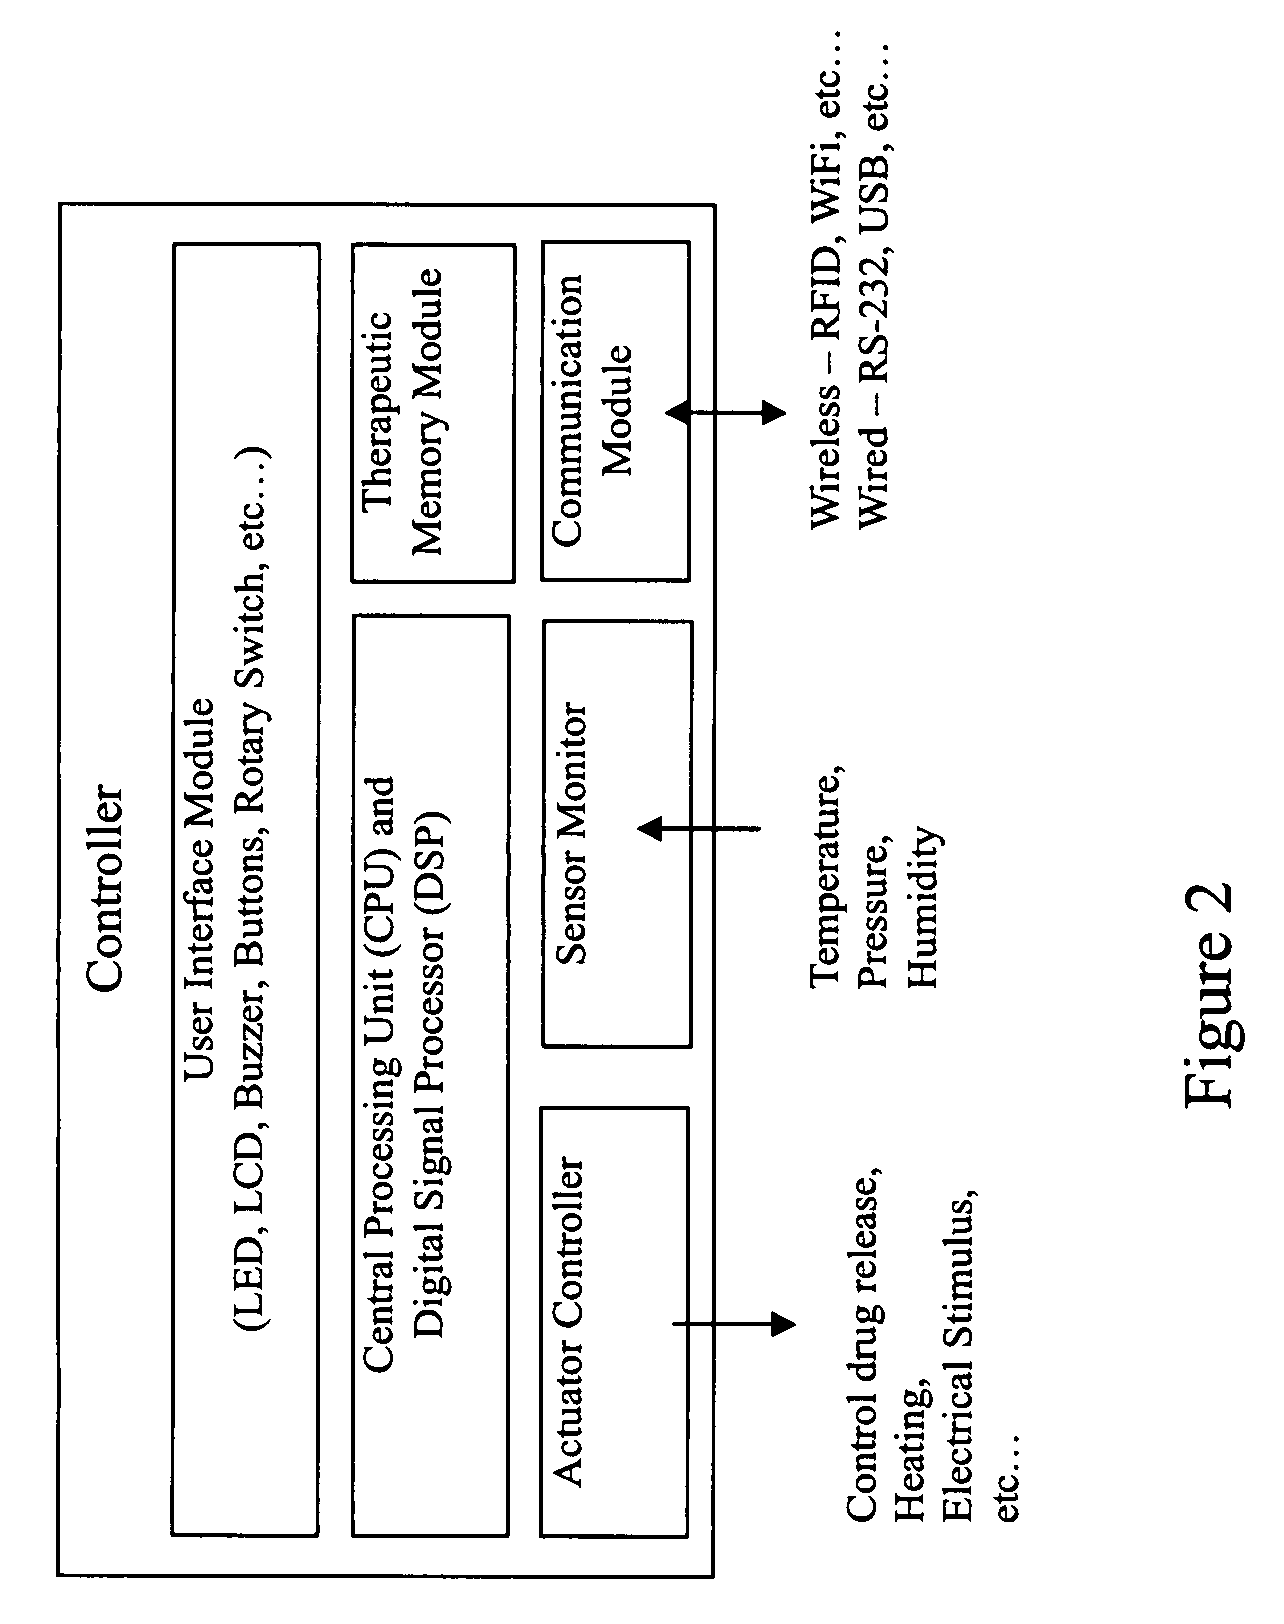 Medical device for delivering drug and/or performing physical therapy